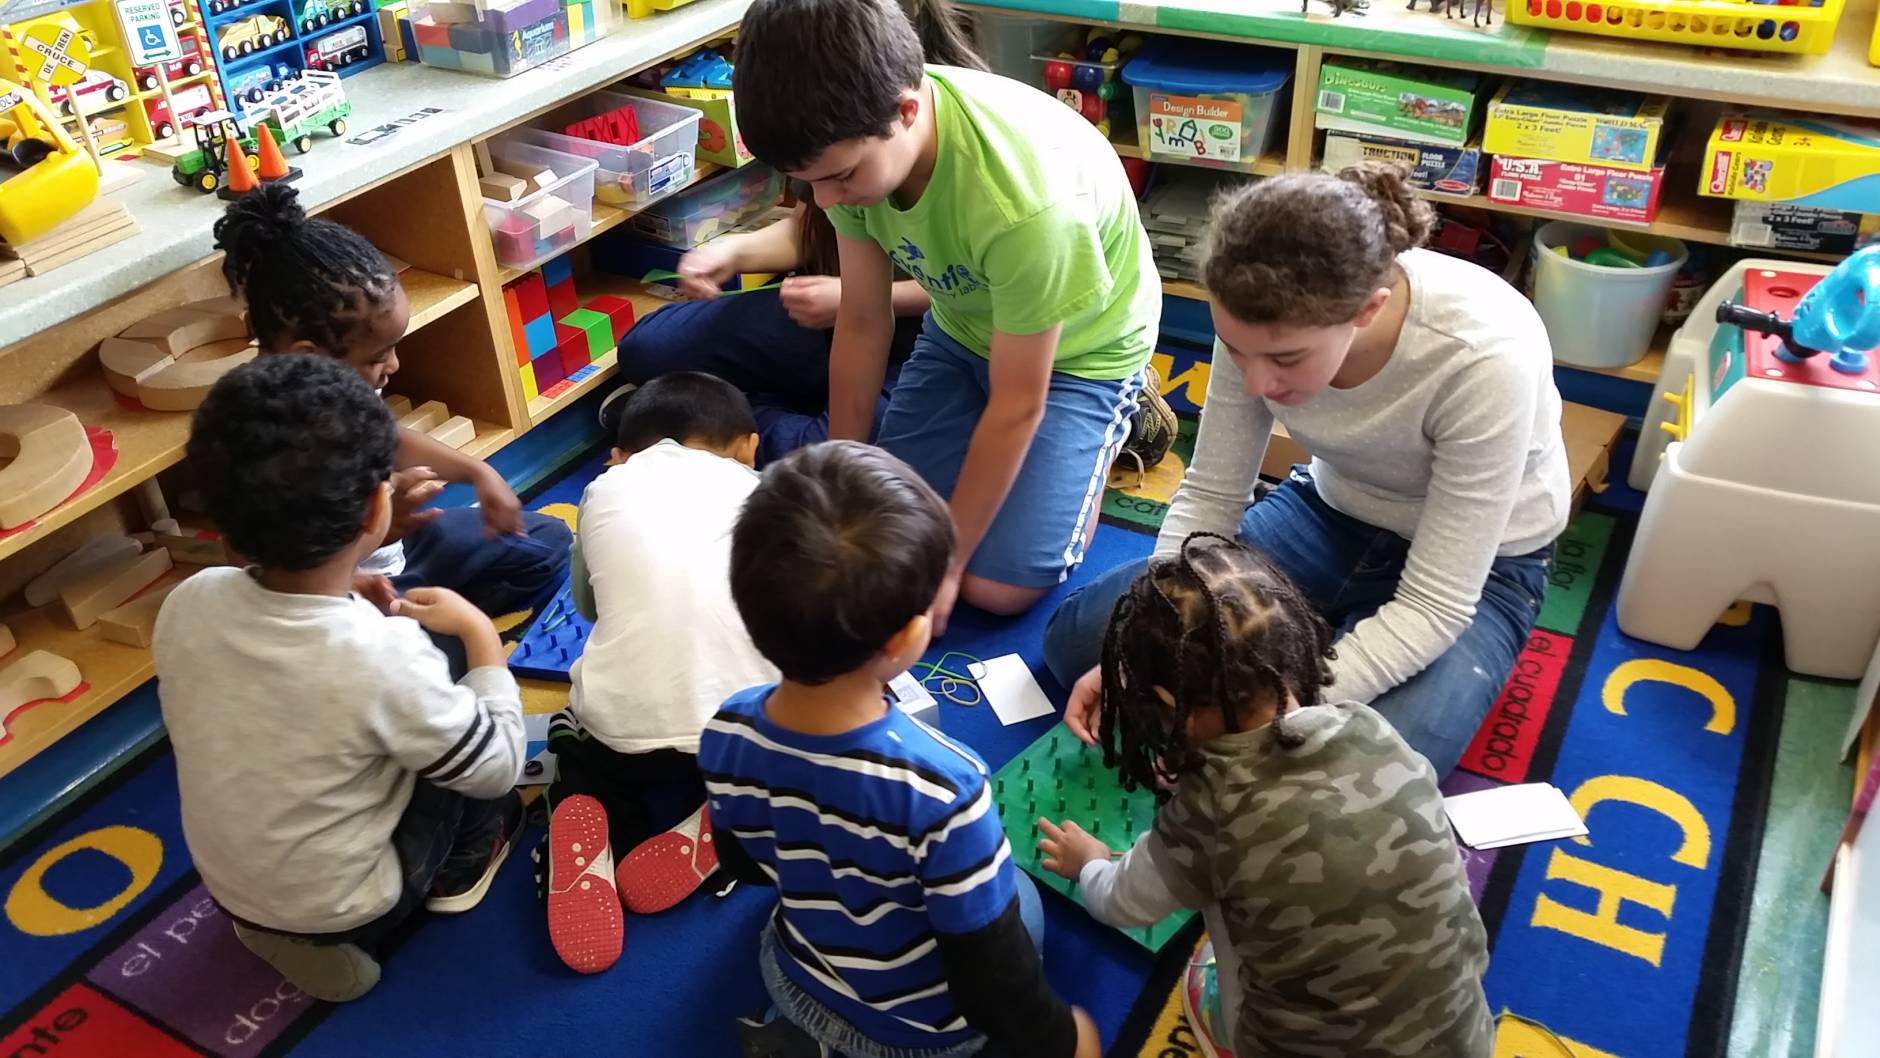 Inventions Academy students partnered with the Northern Virginia Family Service (NVFS) Head Start Preschool in Arlington and engineered STEM toys for disadvantaged preschoolers to teach them about Science, Engineering and Math.  (Courtesy Juliana Heitz)